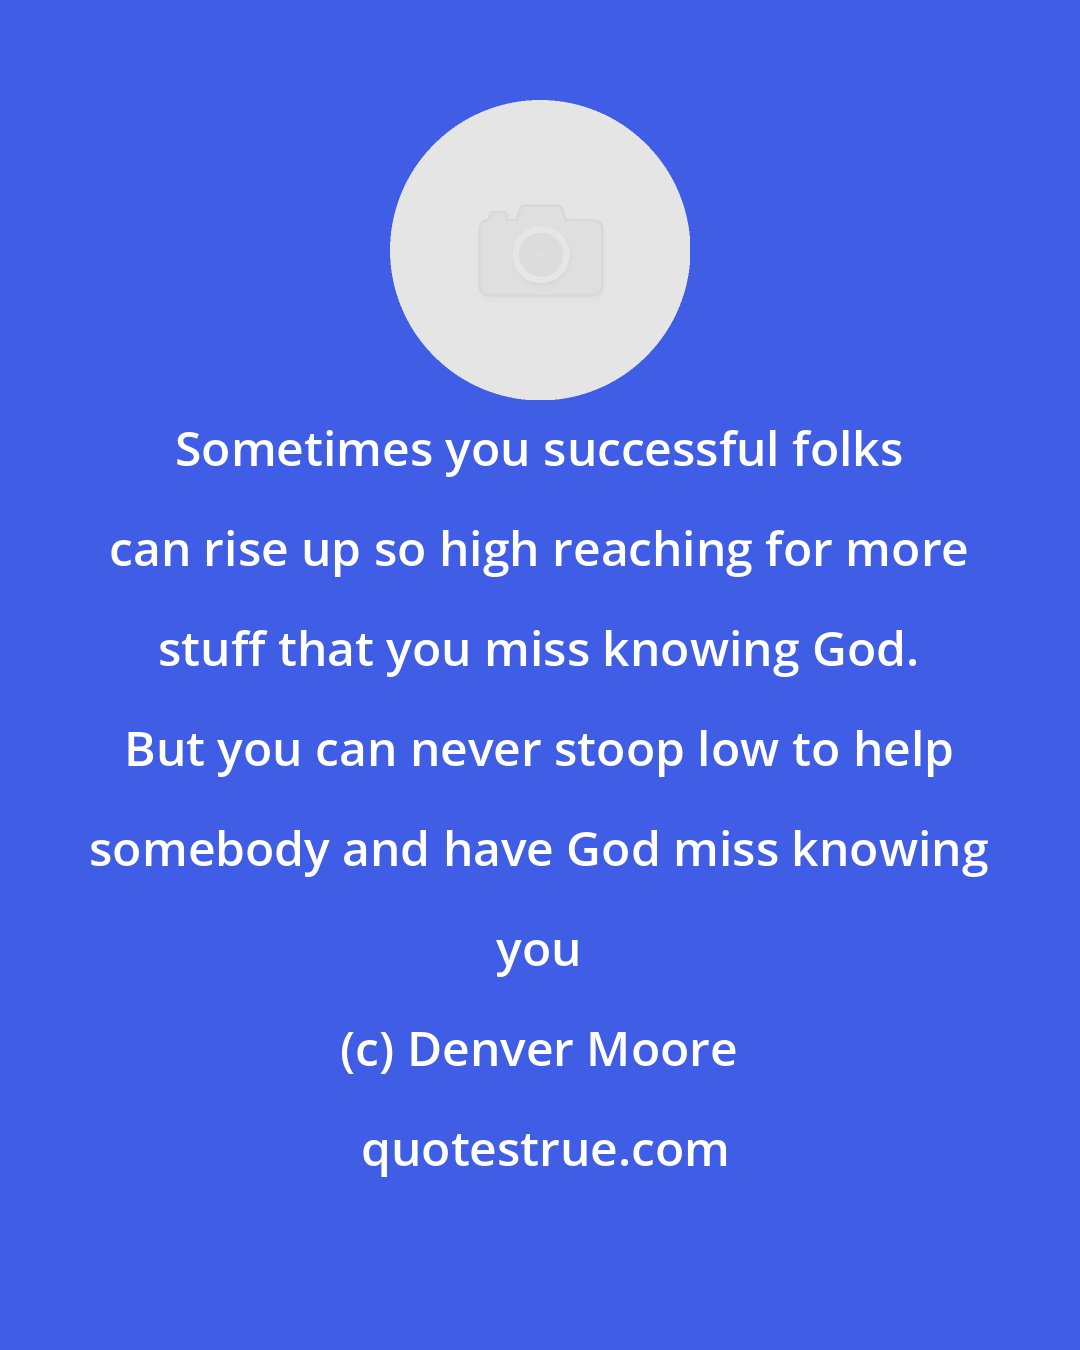 Denver Moore: Sometimes you successful folks can rise up so high reaching for more stuff that you miss knowing God. But you can never stoop low to help somebody and have God miss knowing you